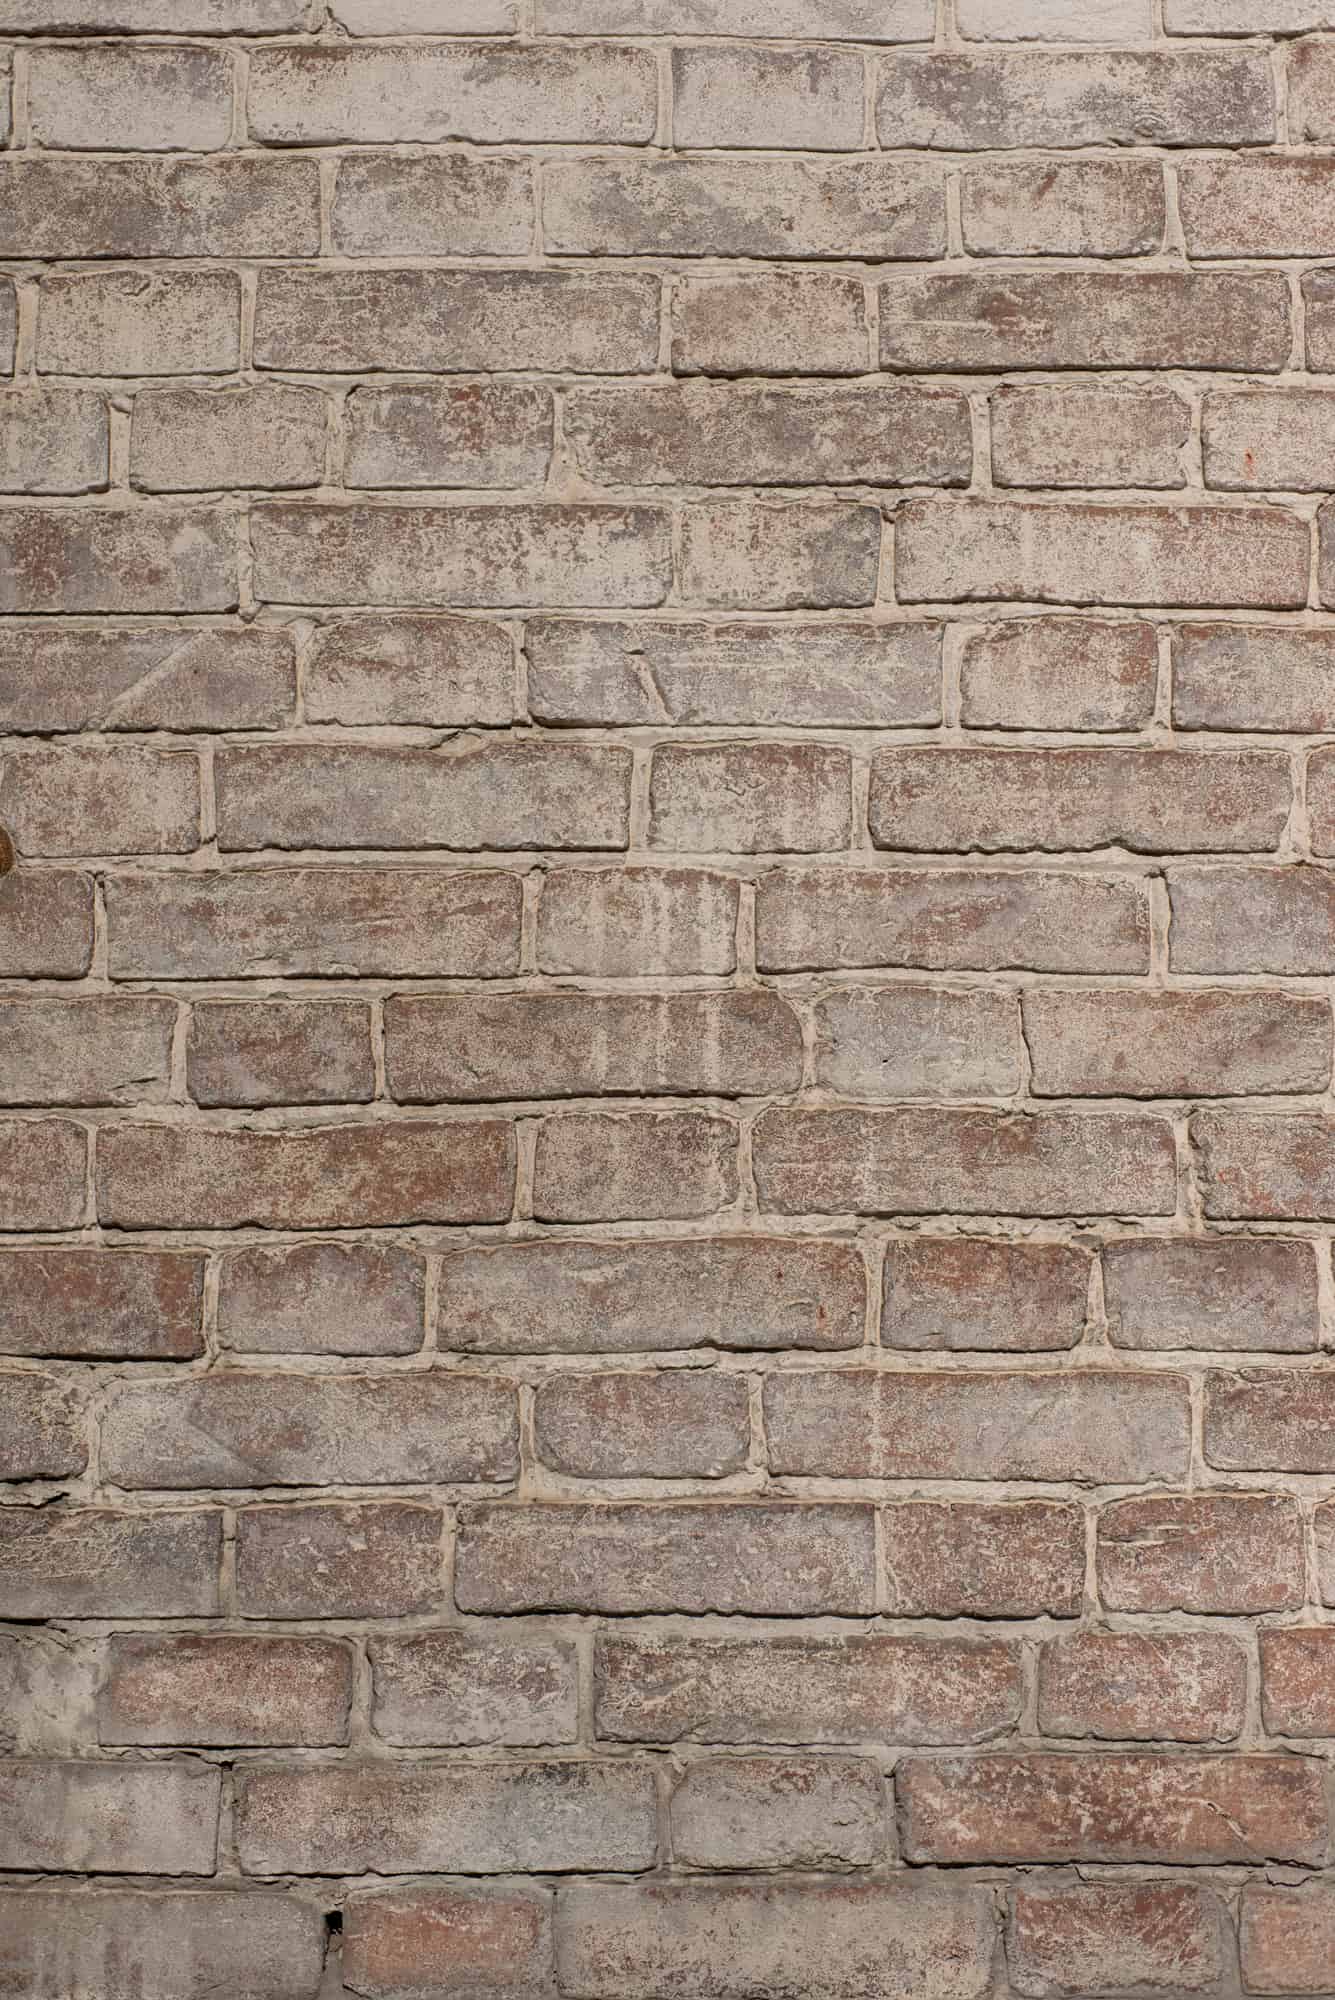 How to Remove Whitewash from Brick? 